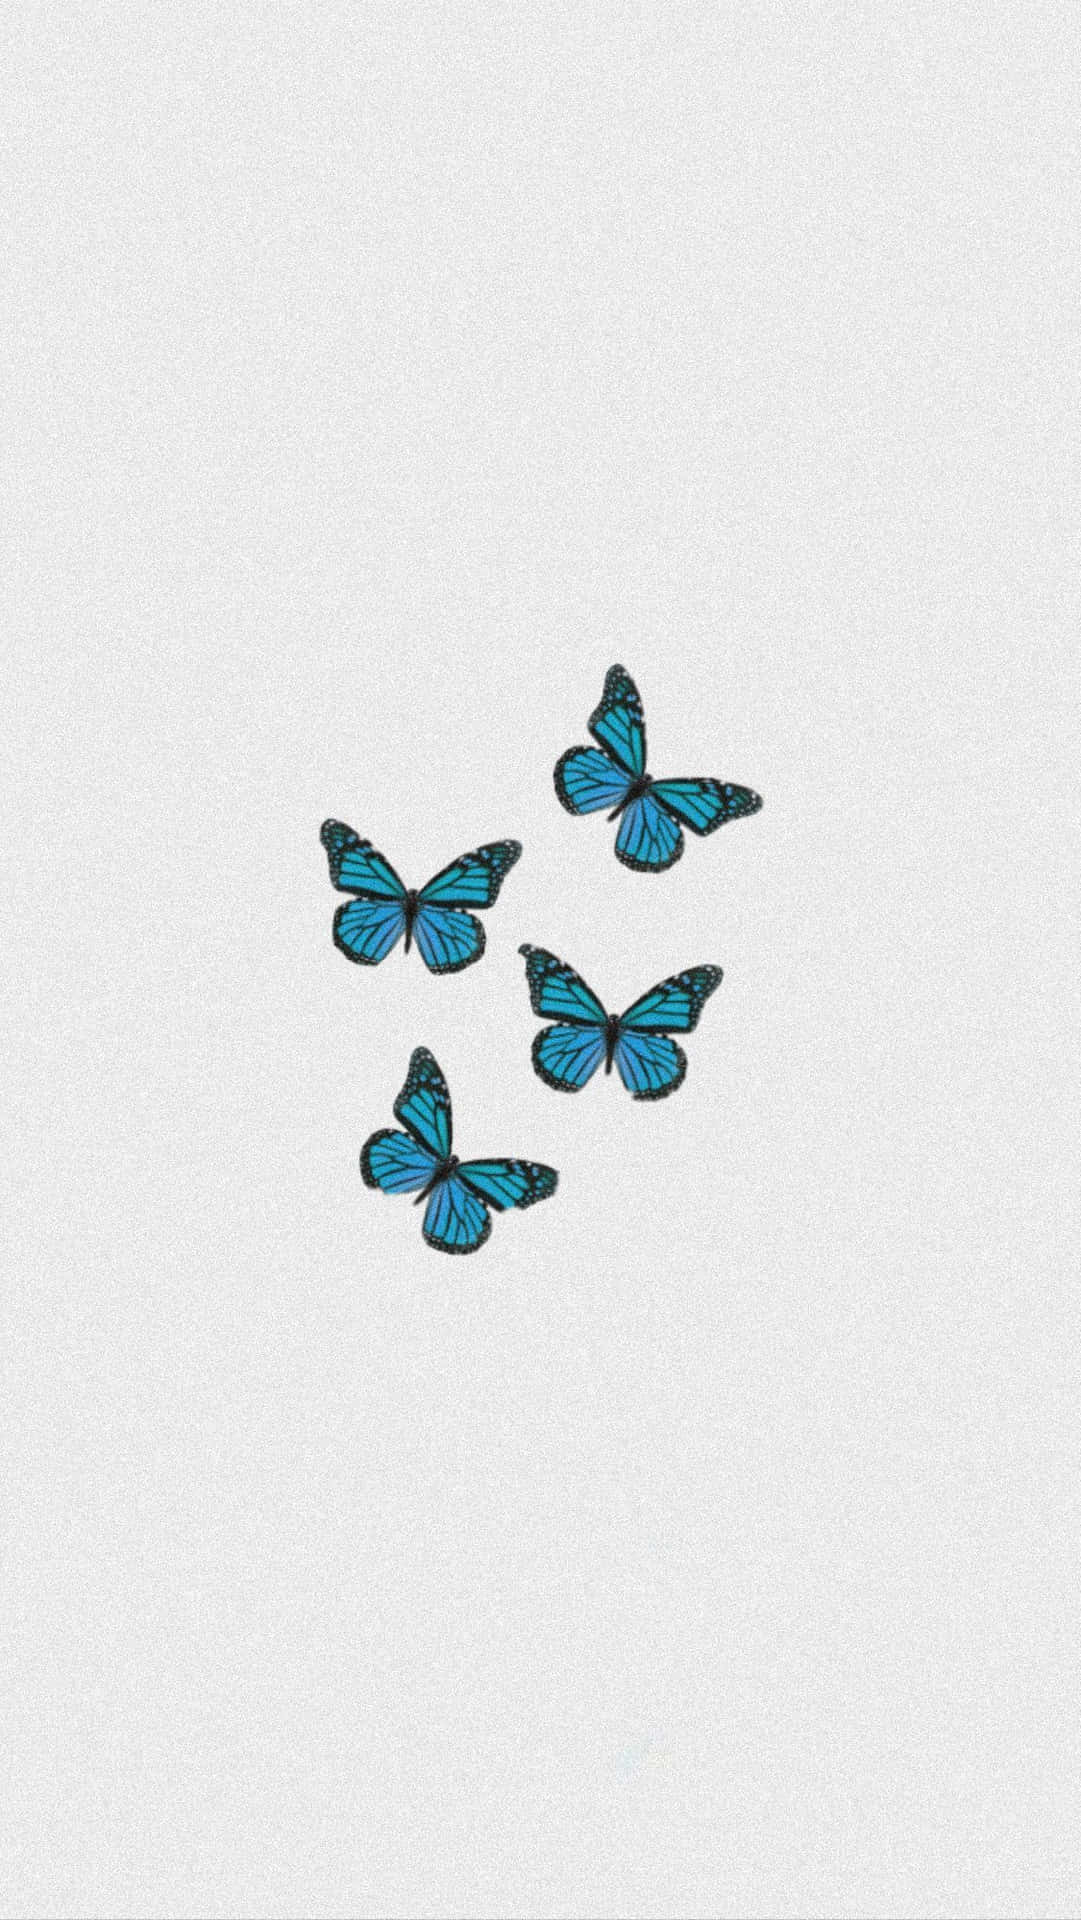 VSCO Butterfly Aesthetic Cover Wallpapers  Wallpaper Cave